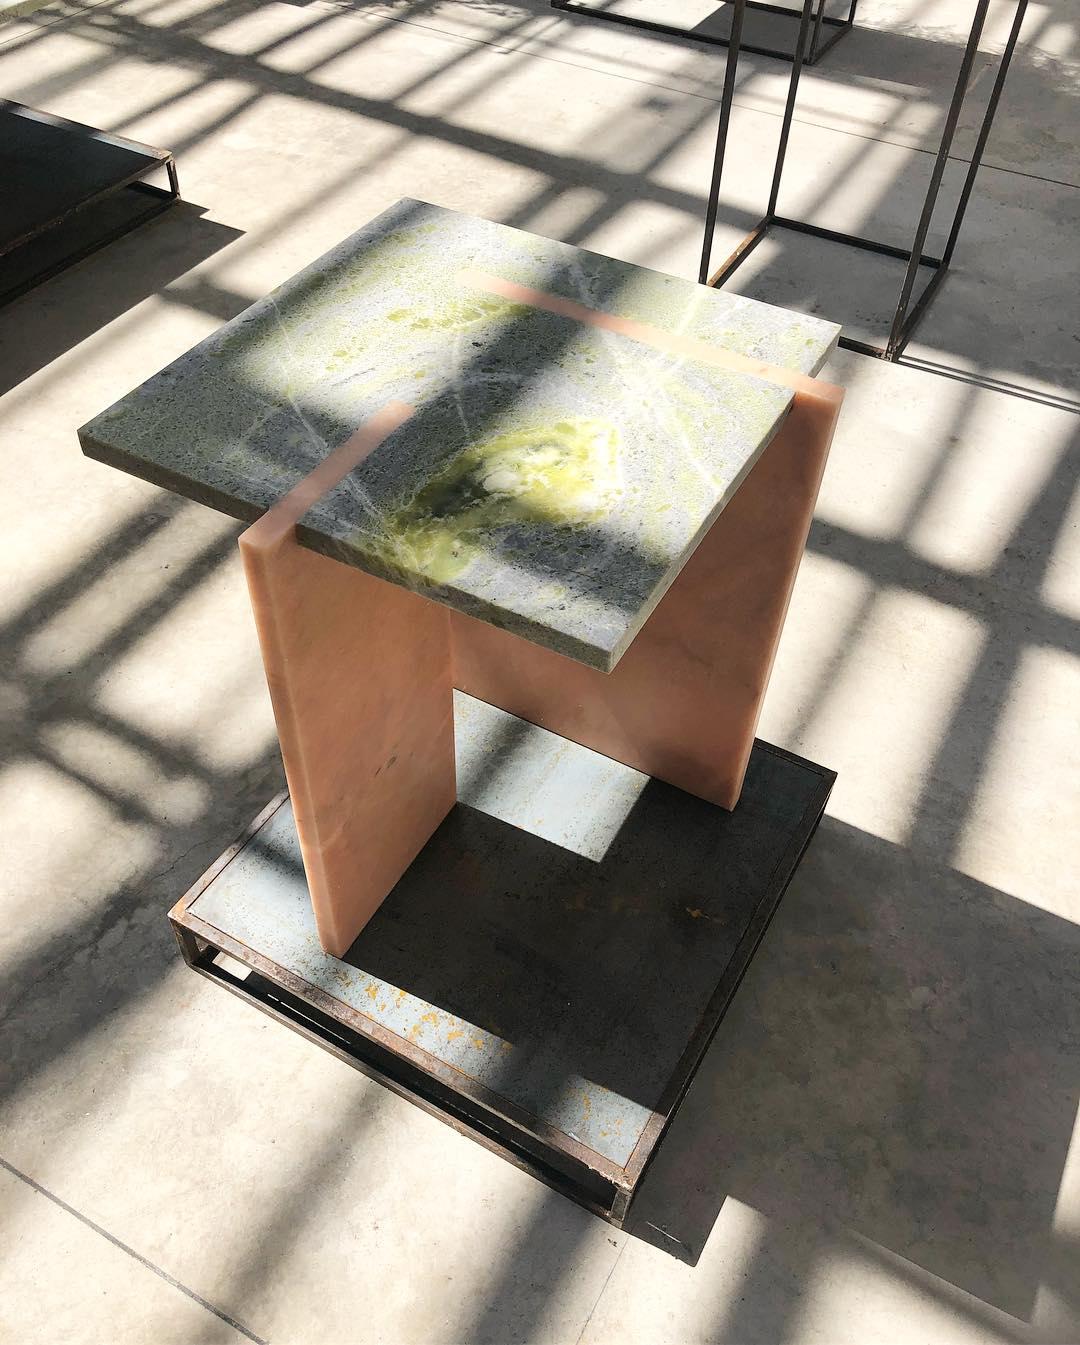 Inlay marble table, Nick Ross
Dimensions: 53 x 43 x 43 cm
Material: Portugal pink marble, green jade

The collection includes a chair, a coffee table and two side tables in a stripped down minimal style. The collection for Bloc studios is